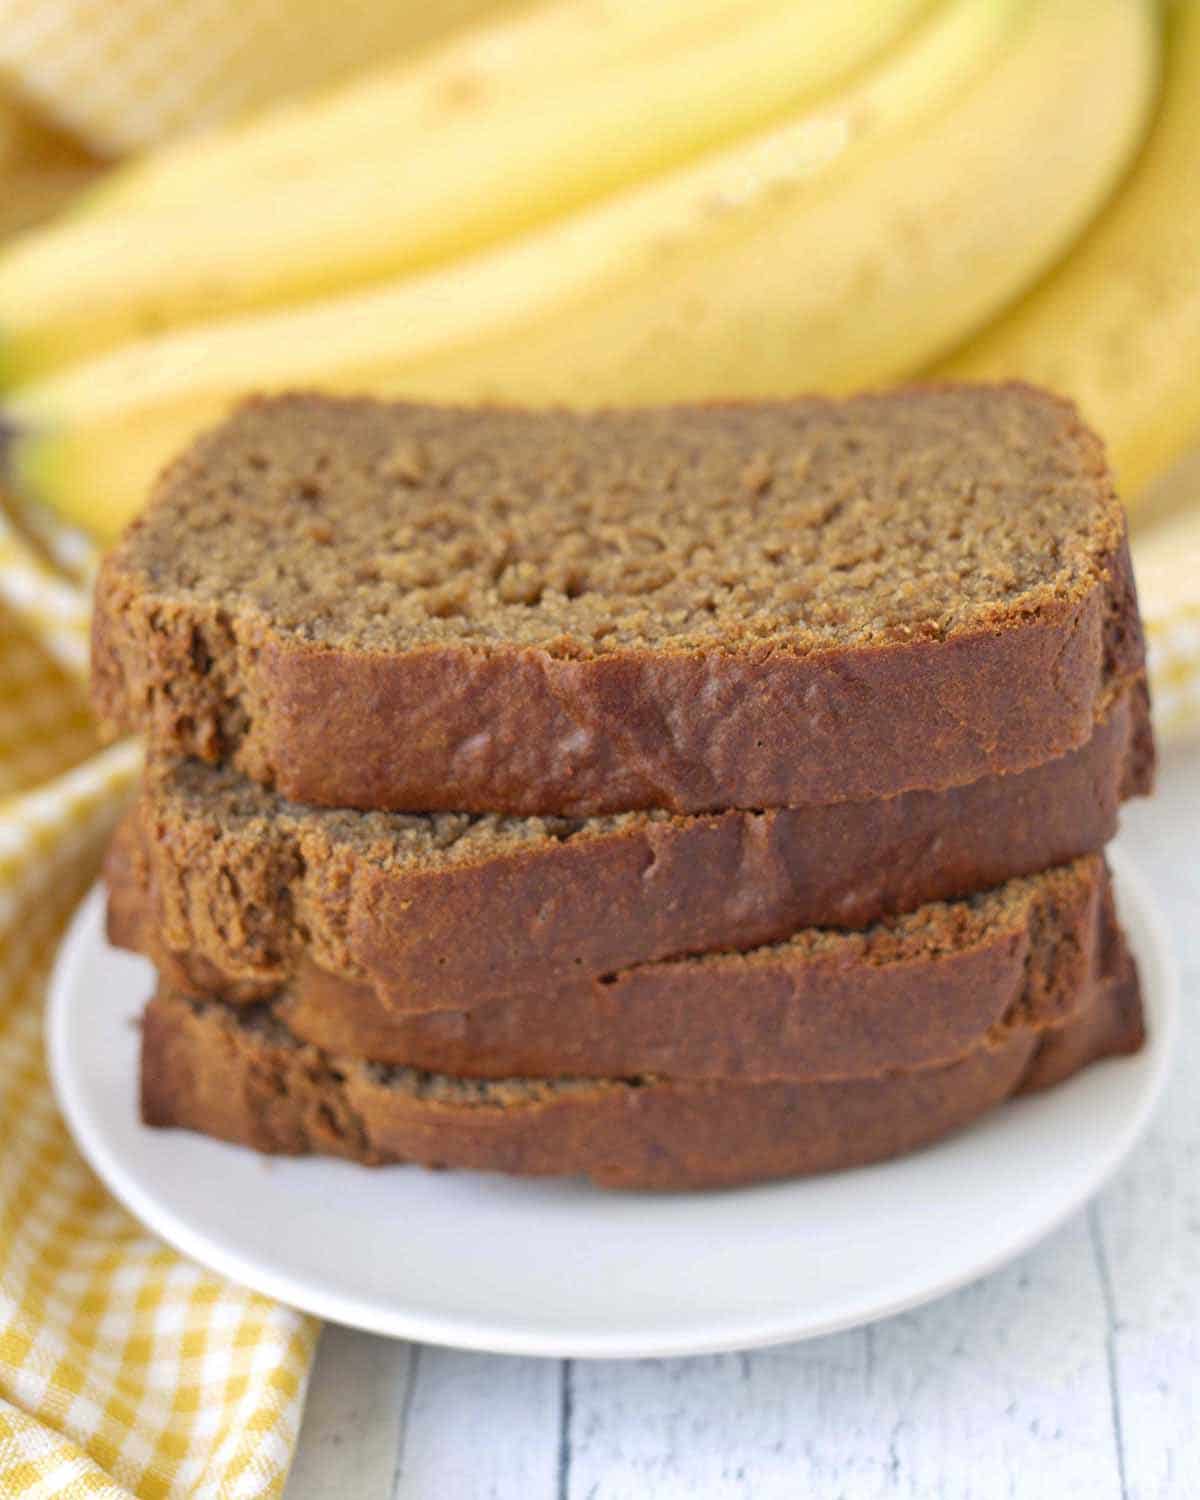 Four slices of eggless banana bread stacked on top of each other, slices are sitting on a white plate.